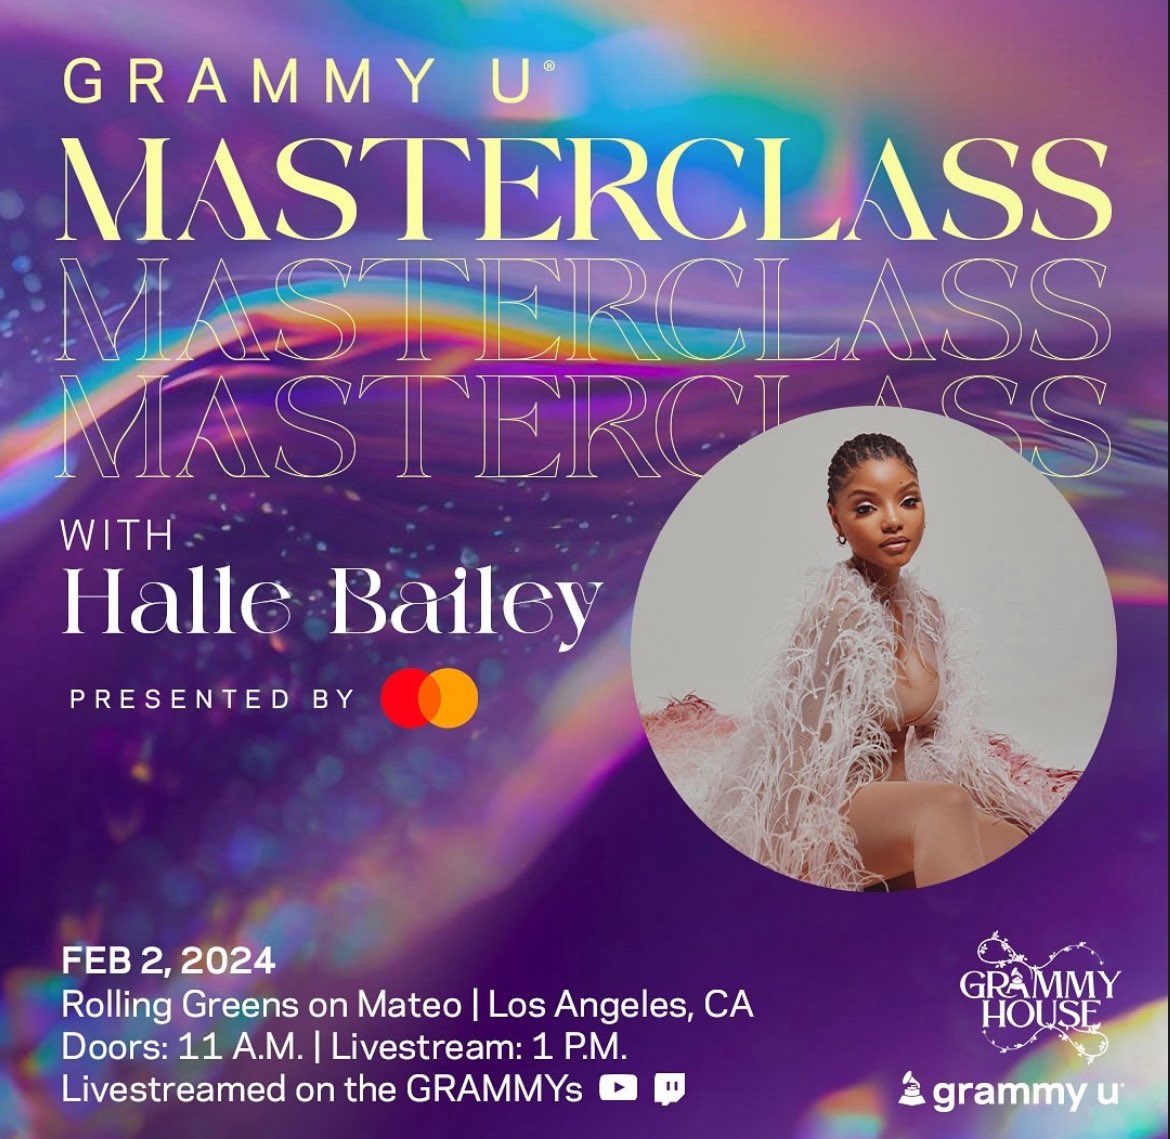 .@HalleBailey will be a featured speaker for a GrammyU Masterclass February 2nd 🏆

( This interview will be live streamed on YouTube & Twitch! )